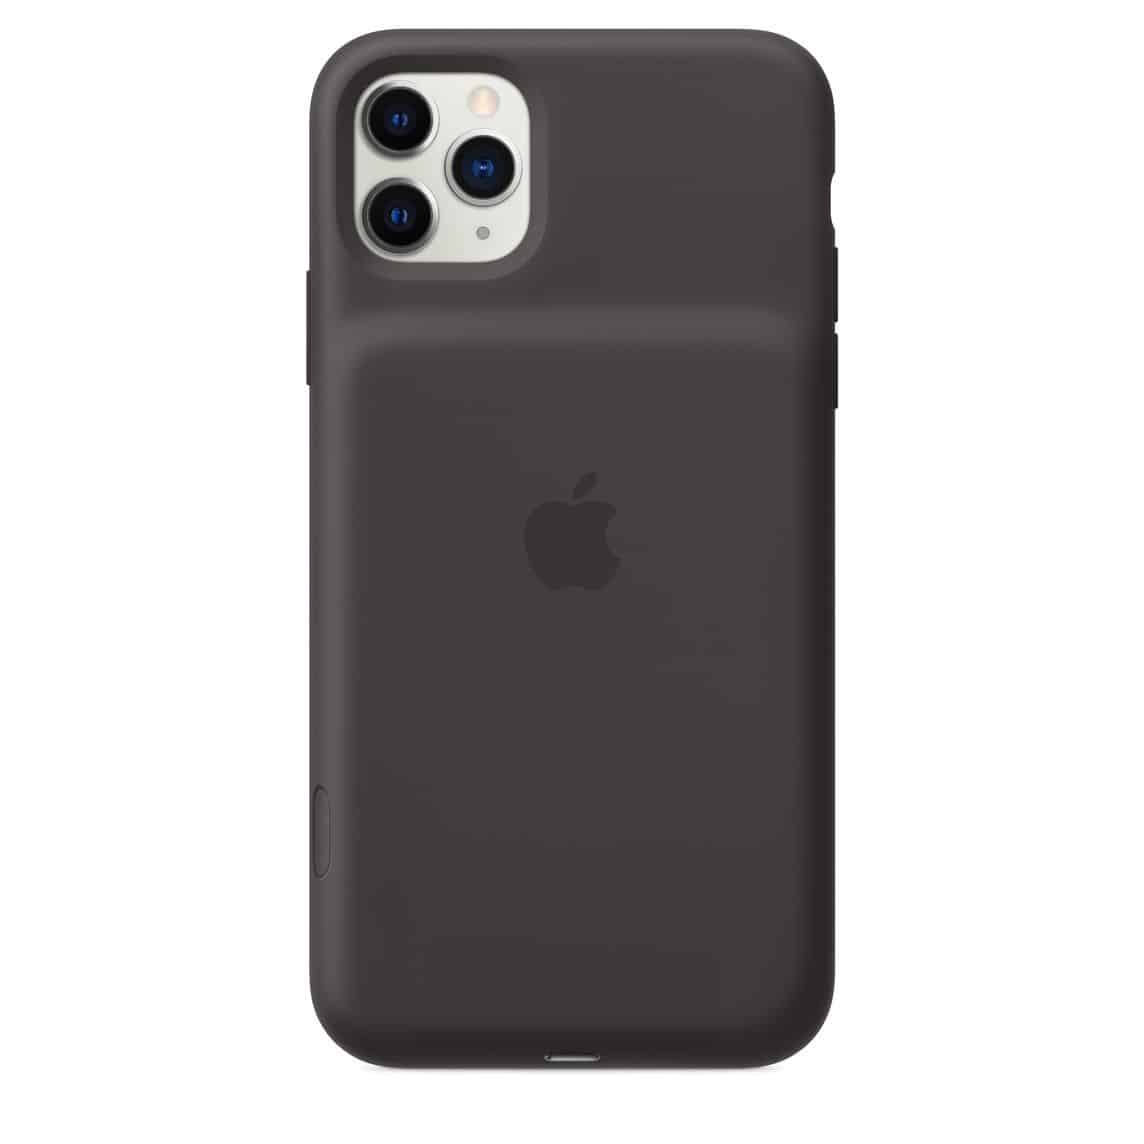 Iphone Smart Battery Case